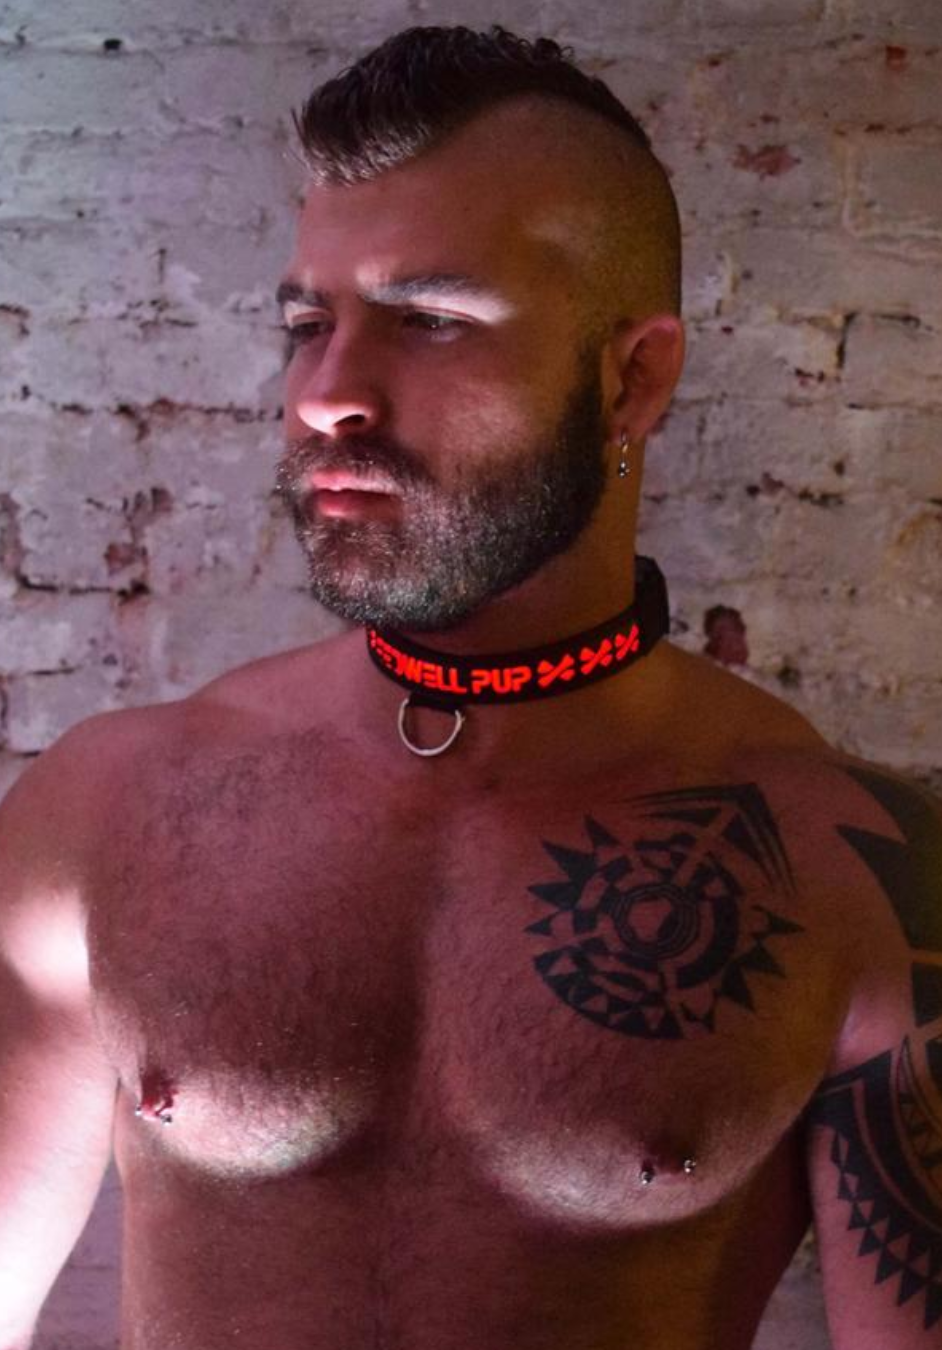 A model wearing the Breedwell Pup Collar with red LED color.